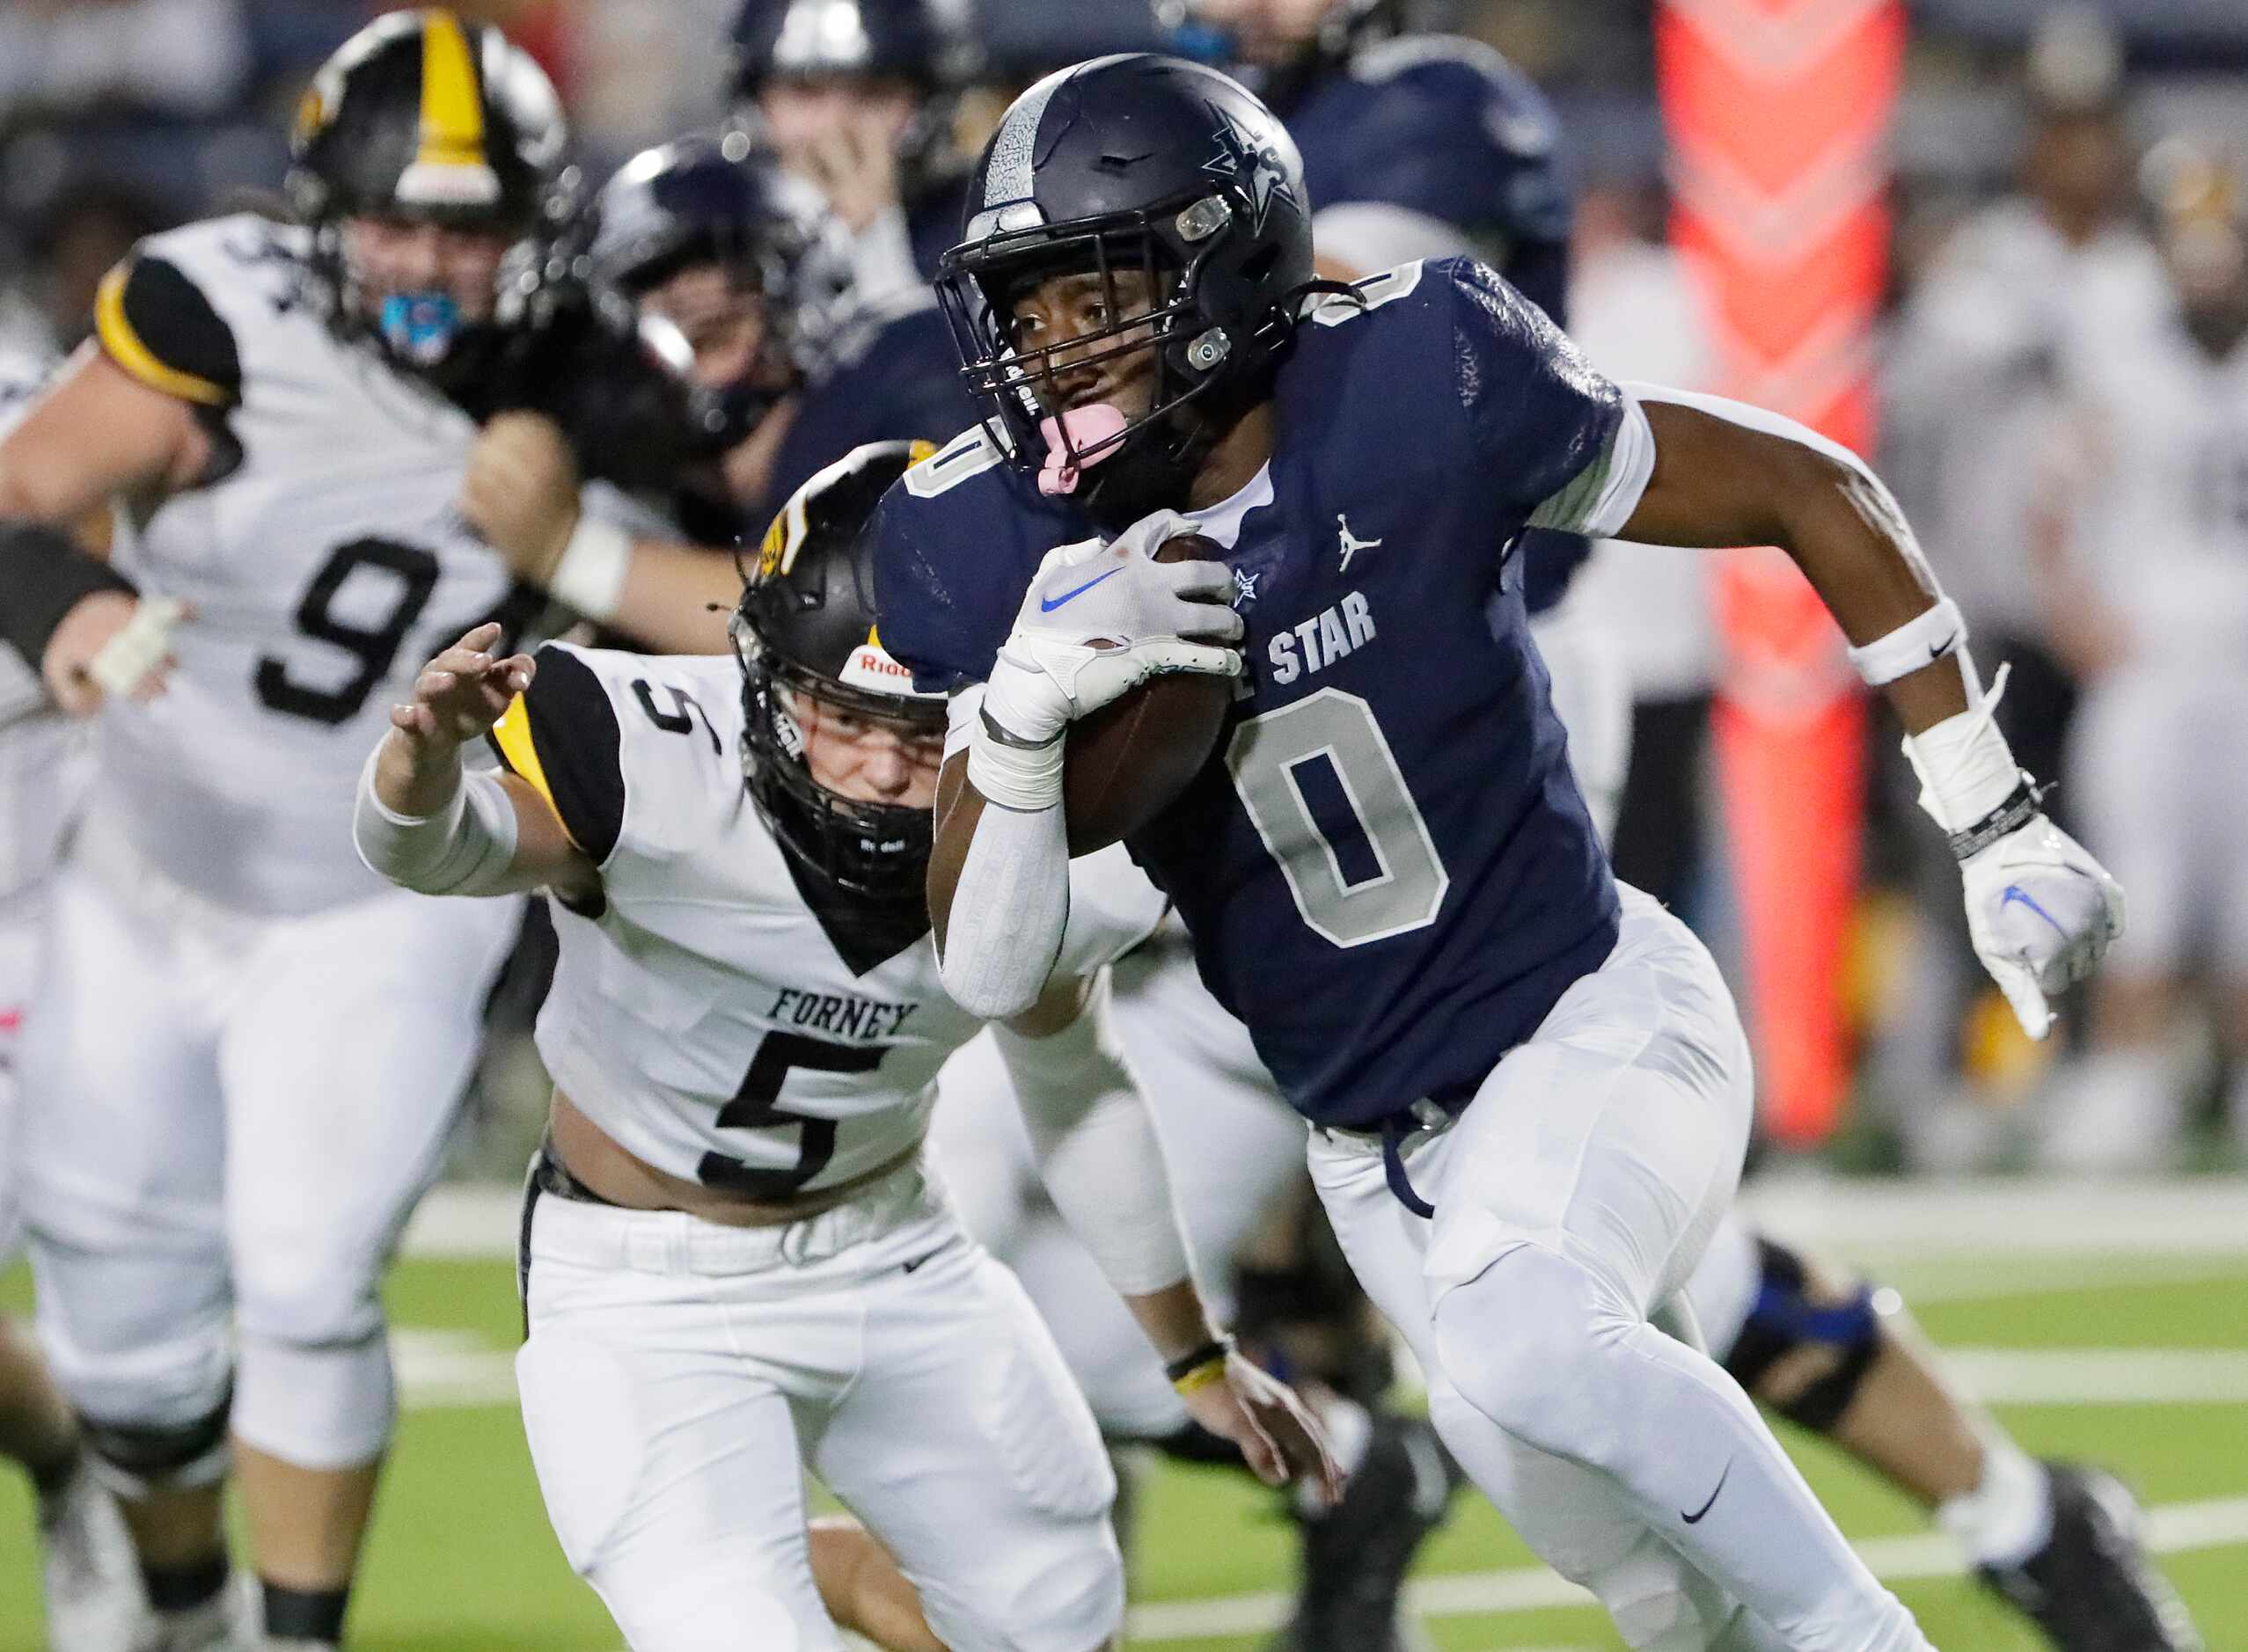 Forney High School outside linebacker Easton McMillan (5) attempts to tackle Lone Star High...